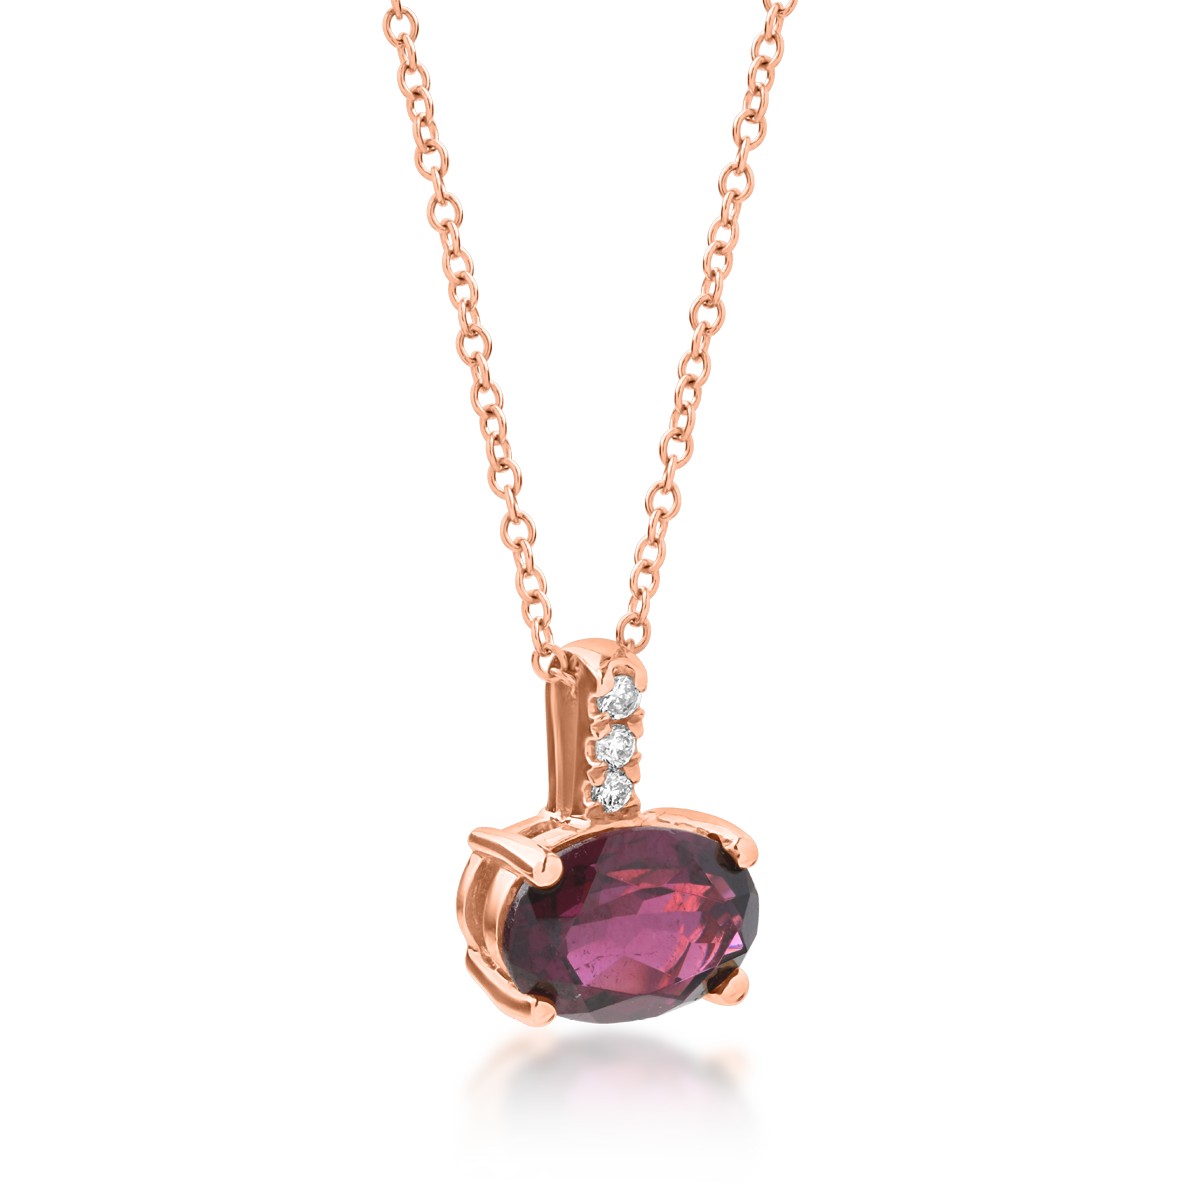 18K rose gold pendant necklace with 1.03ct garnet and 0.019ct diamonds